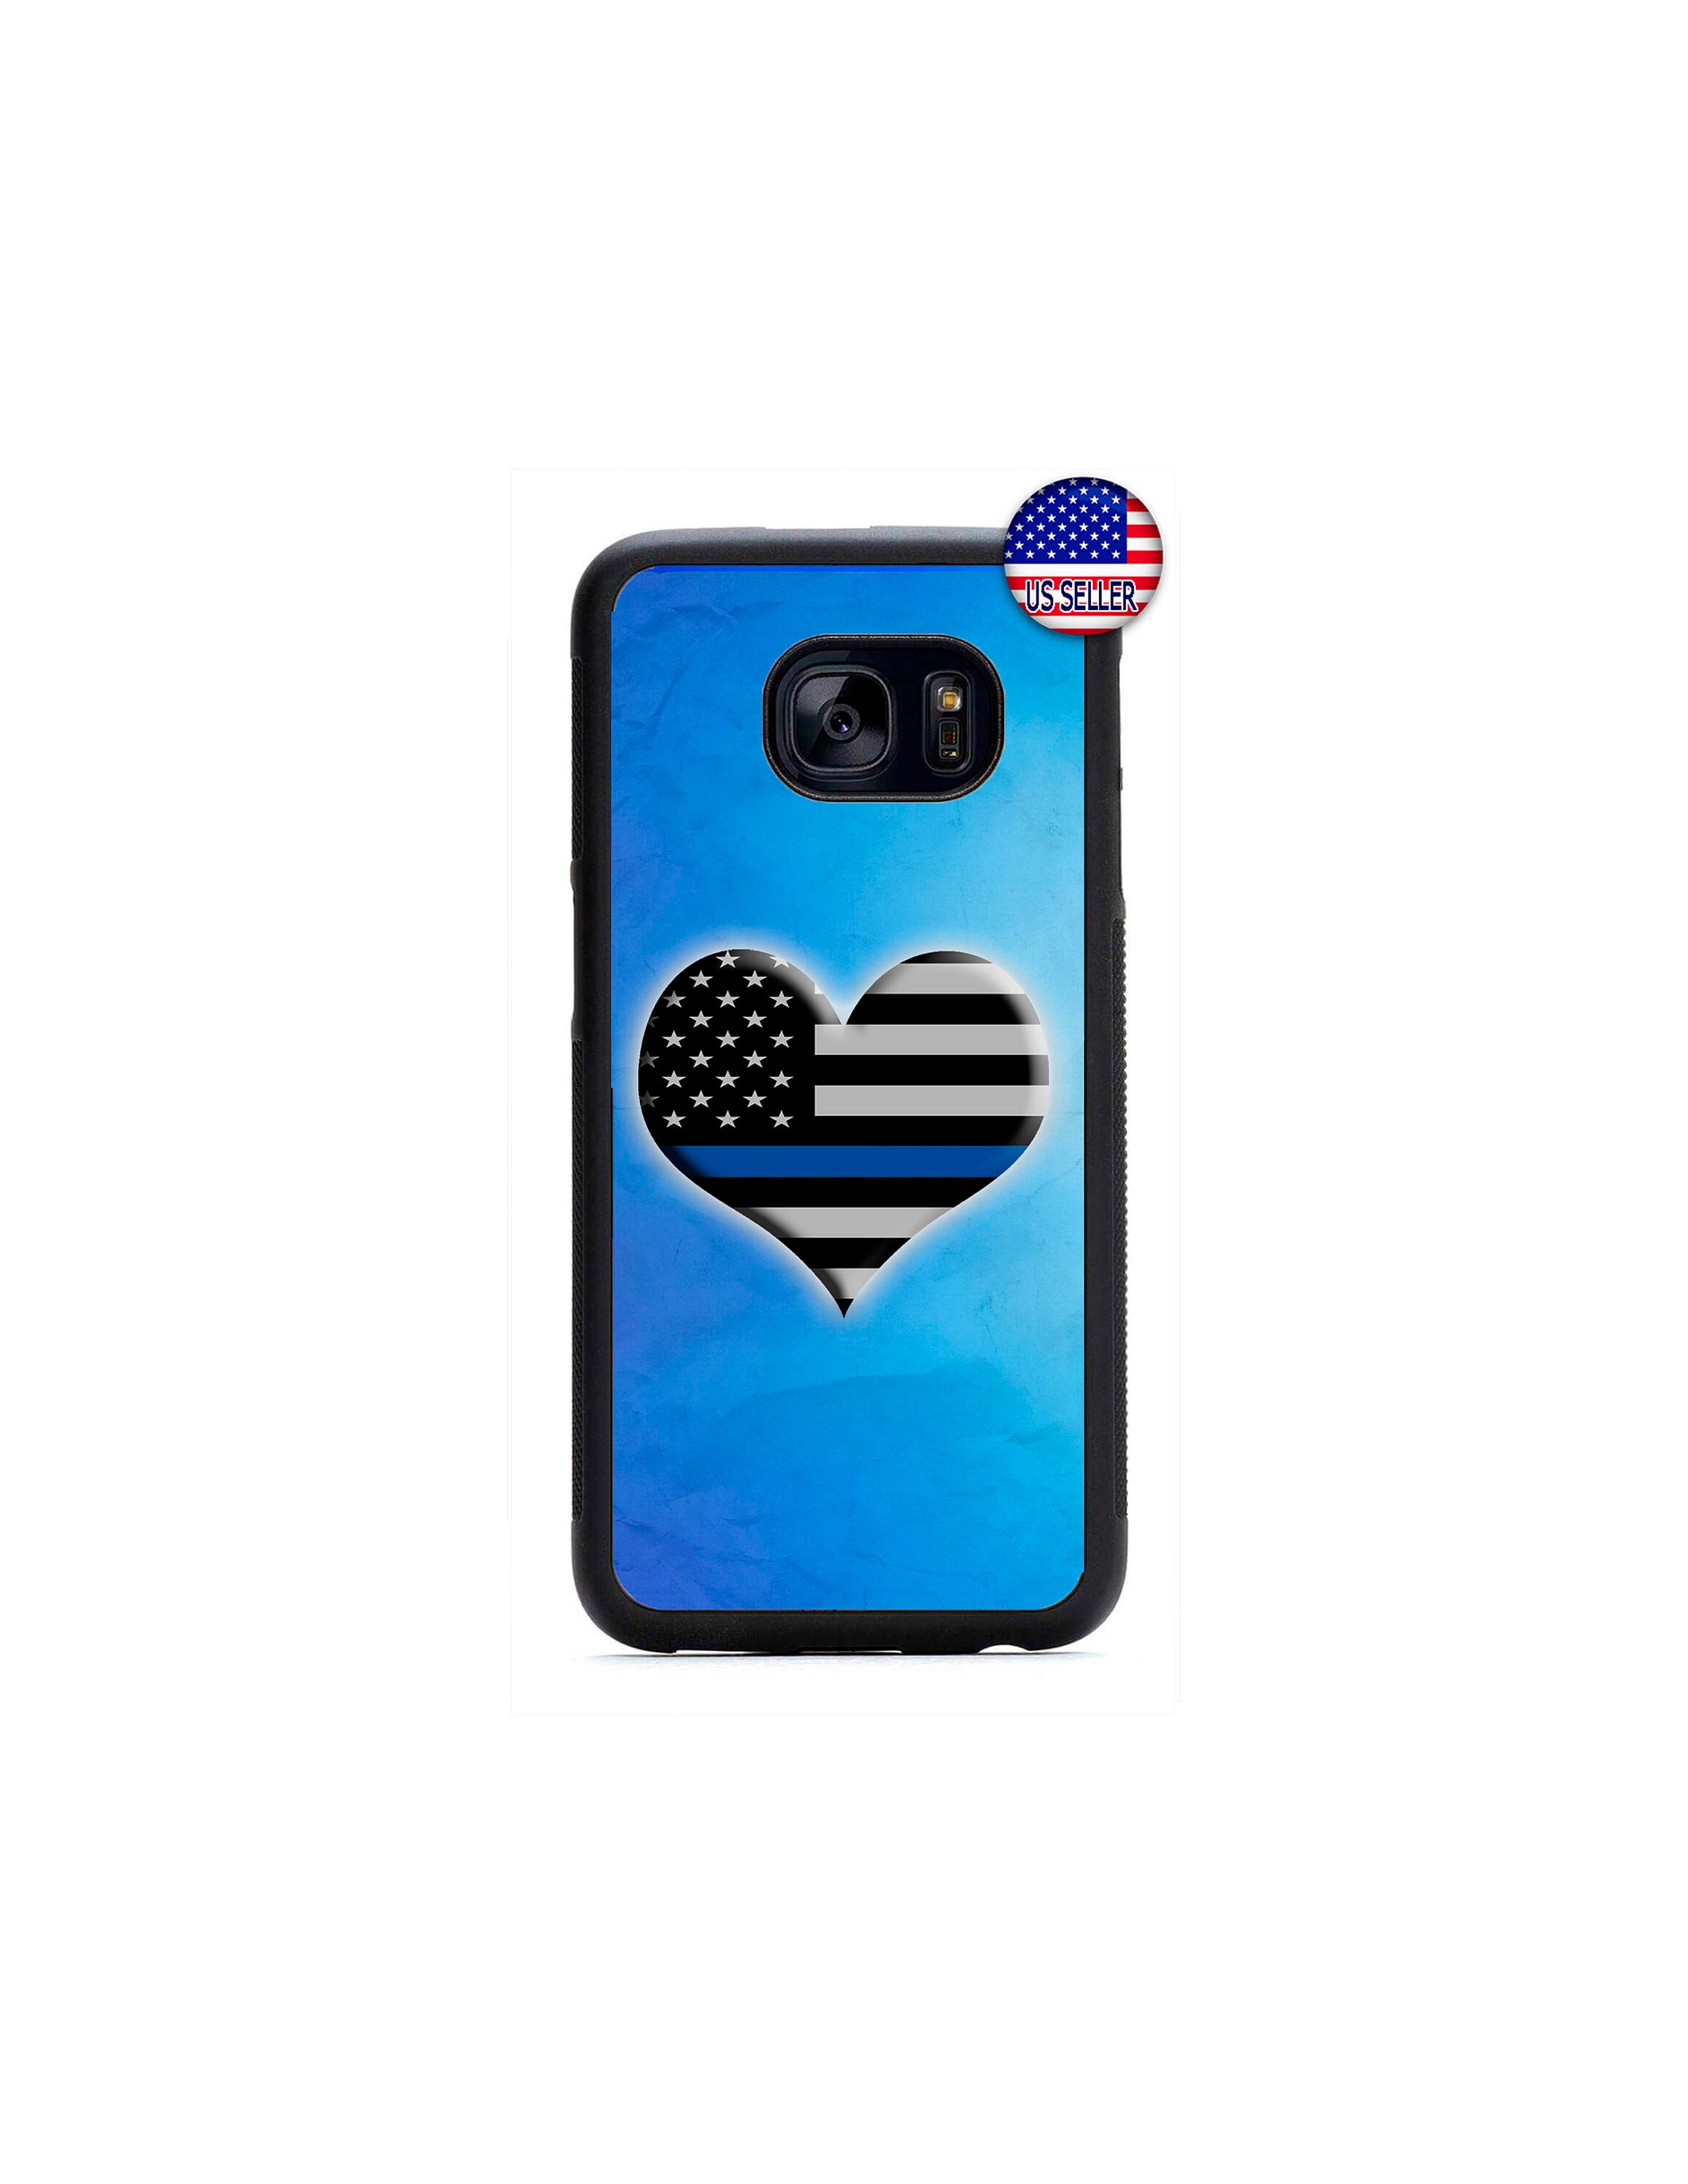 Decorative Phone Case for Police Officers